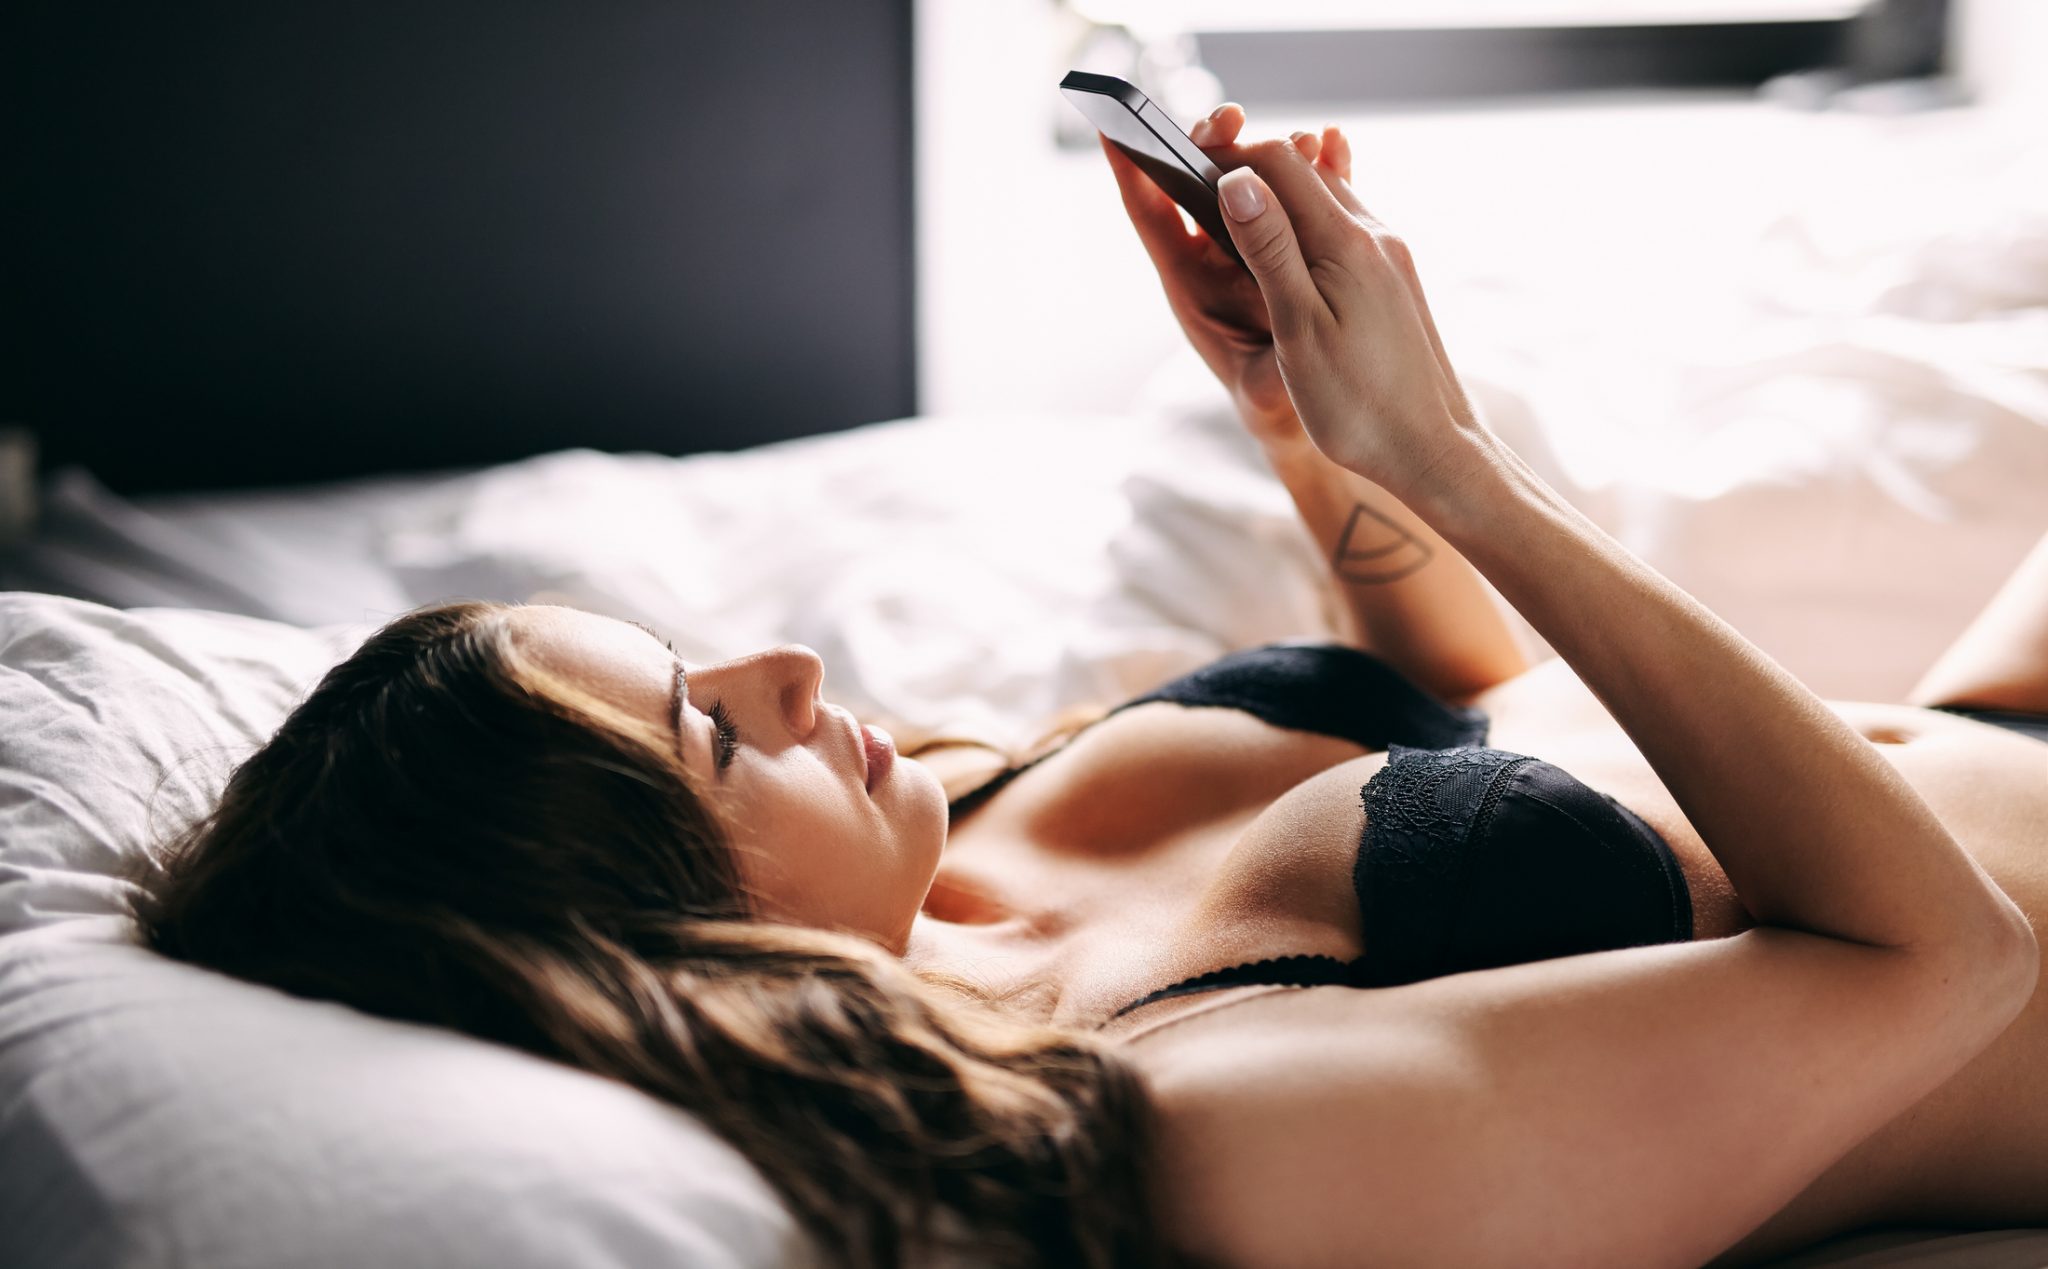 Elevate Your Sexting Game: A Guide to Consexting While Respecting Boundaries